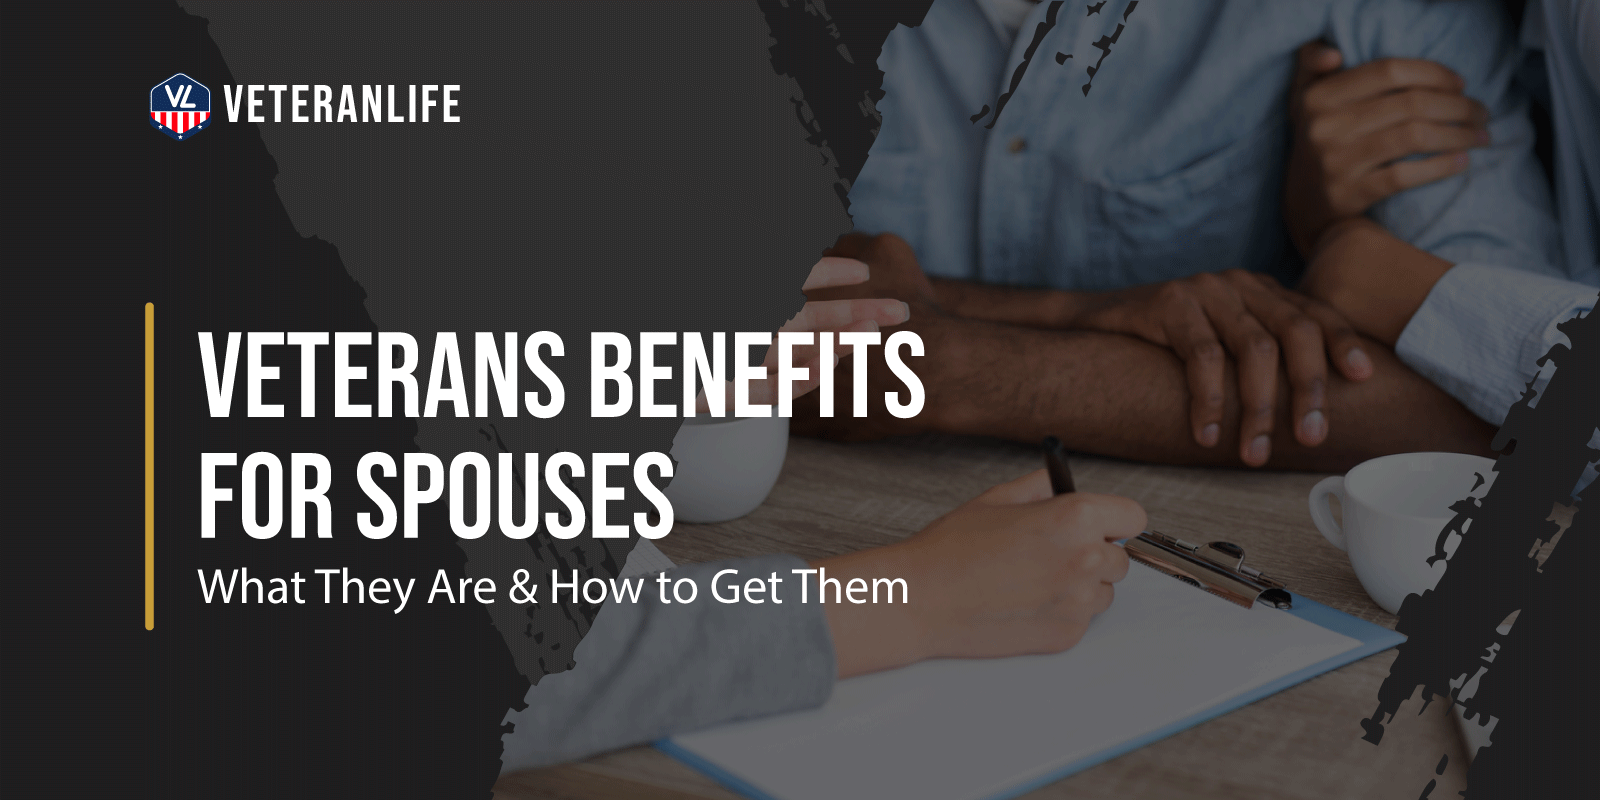 Veterans Benefits for Spouses: What They Are & How to Get Them